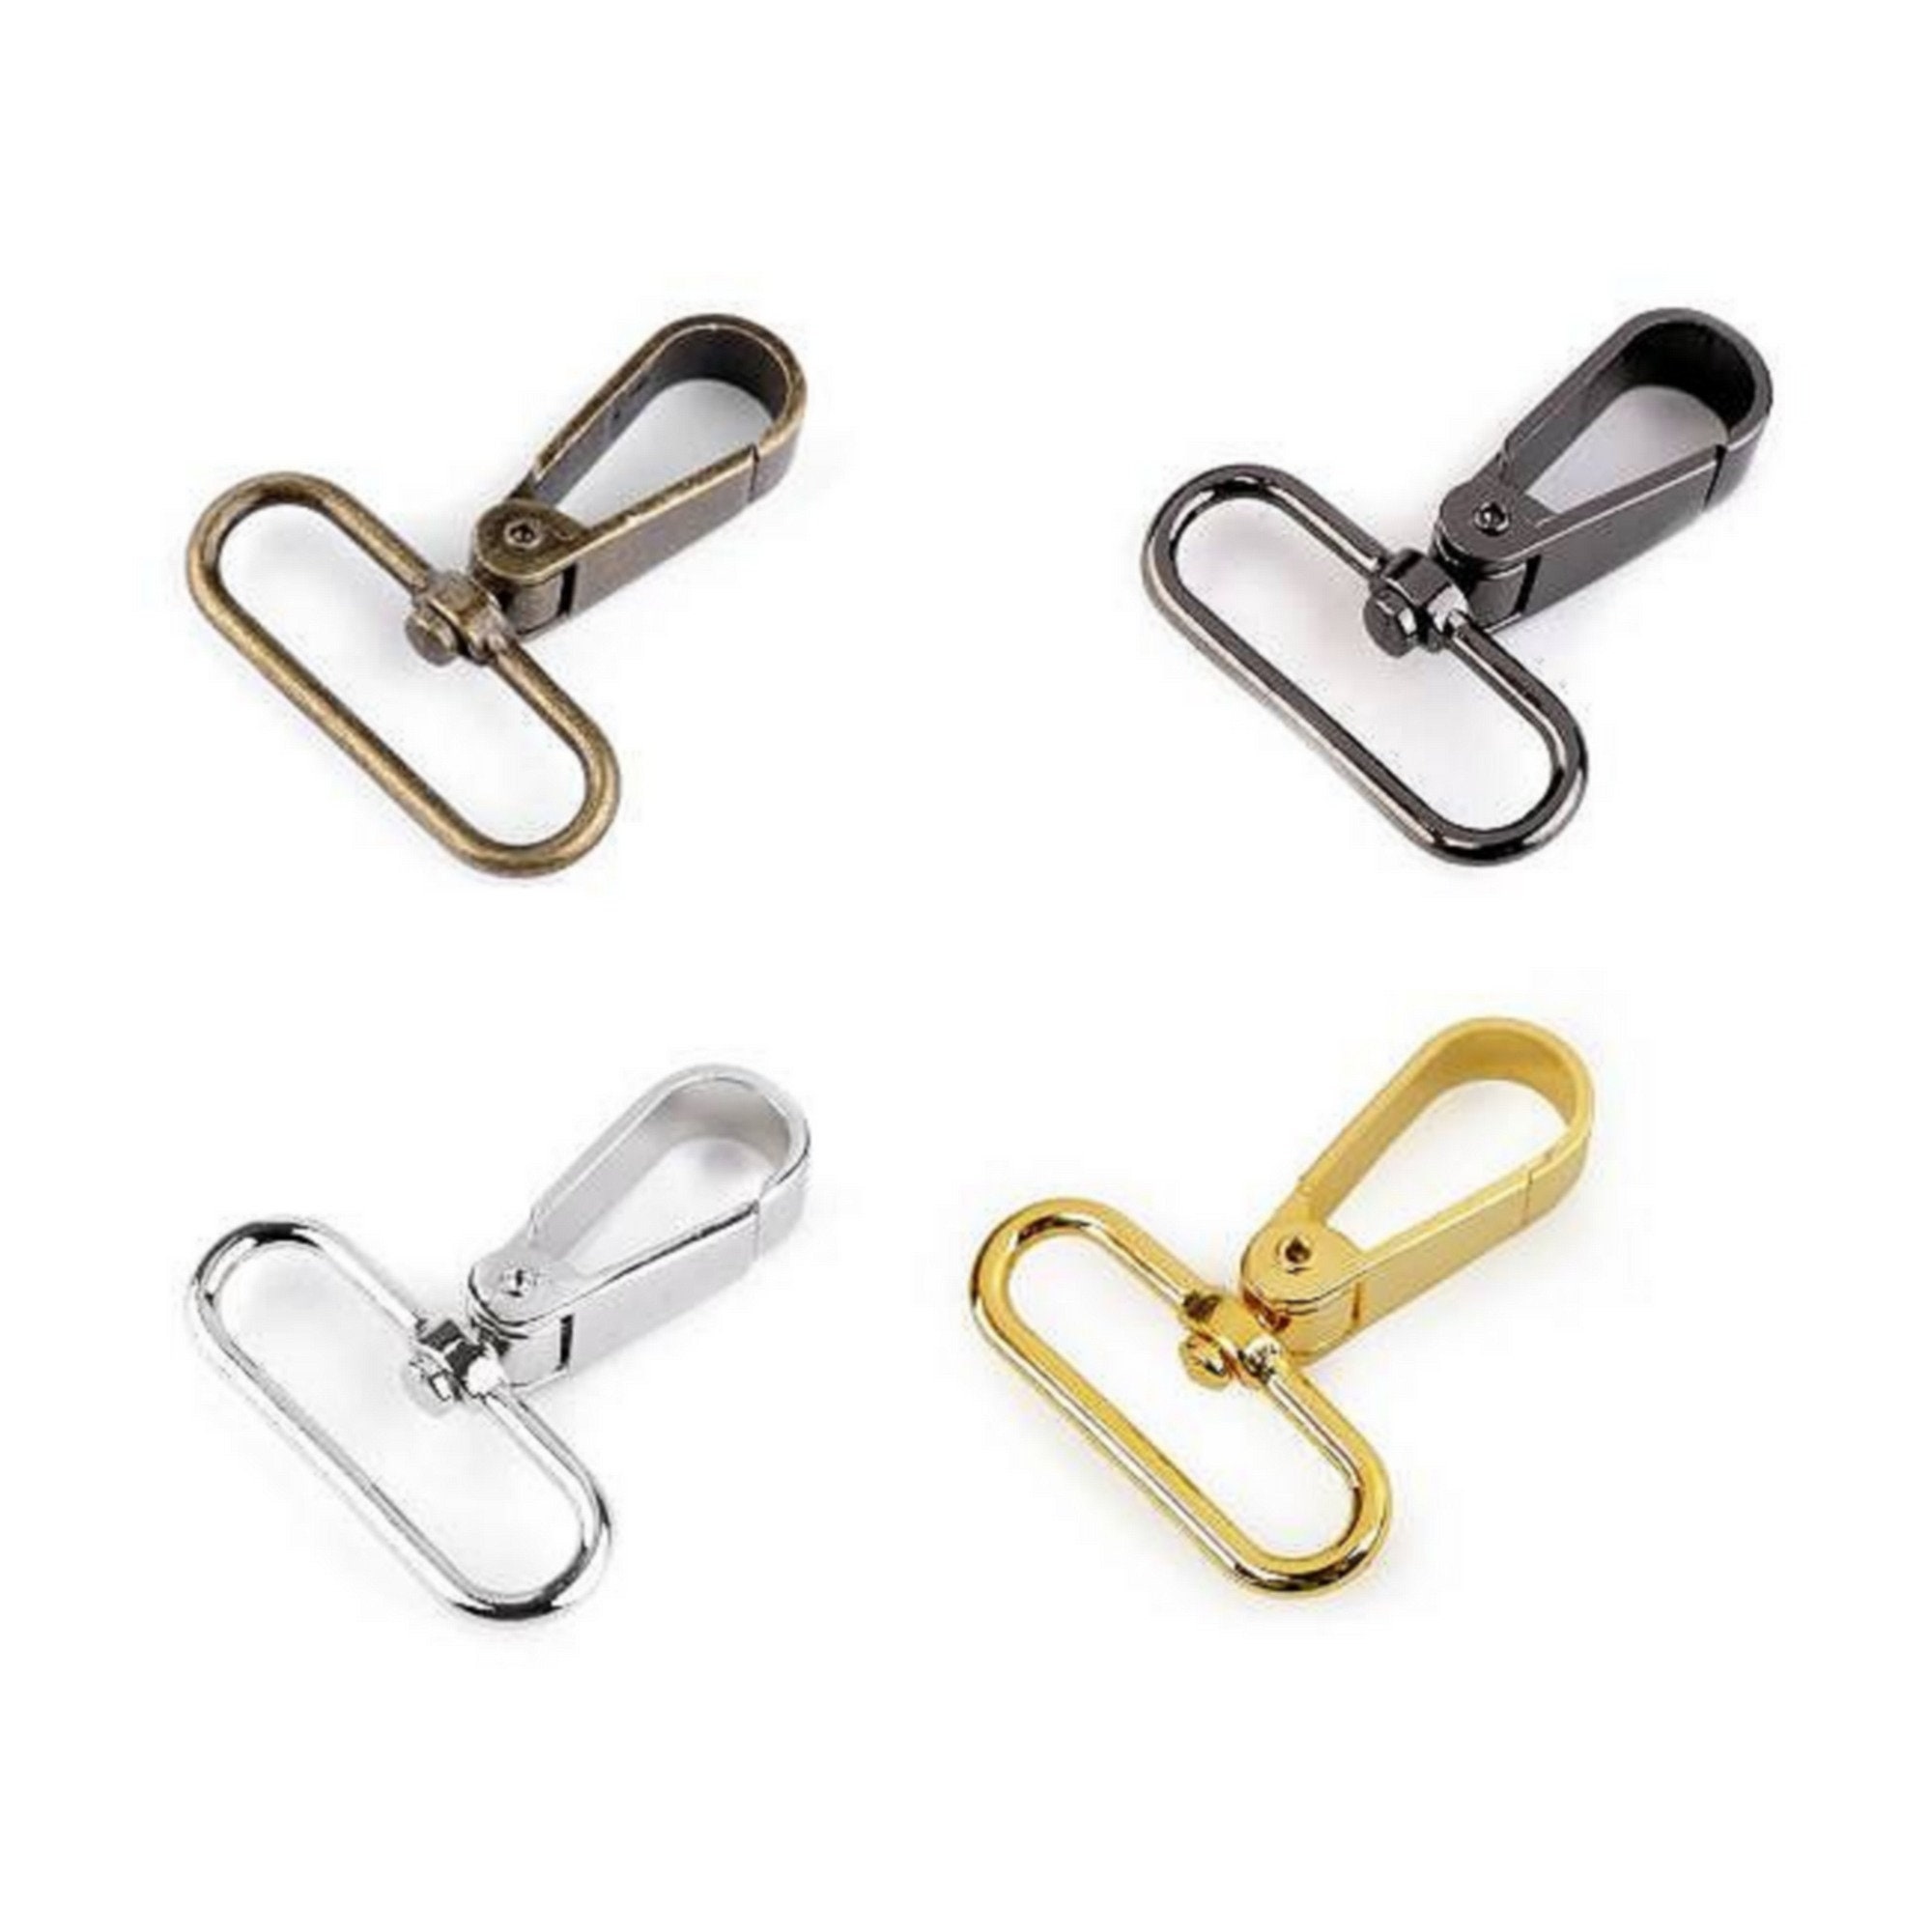 Buy Silver Swivel Snap Hook Leash Clip Zinc Die Cast Leash Snap Clasp  5416mm Swivel Clasps-lanyard-chain Holder for Dog Leash/bag/purse Online in  India 